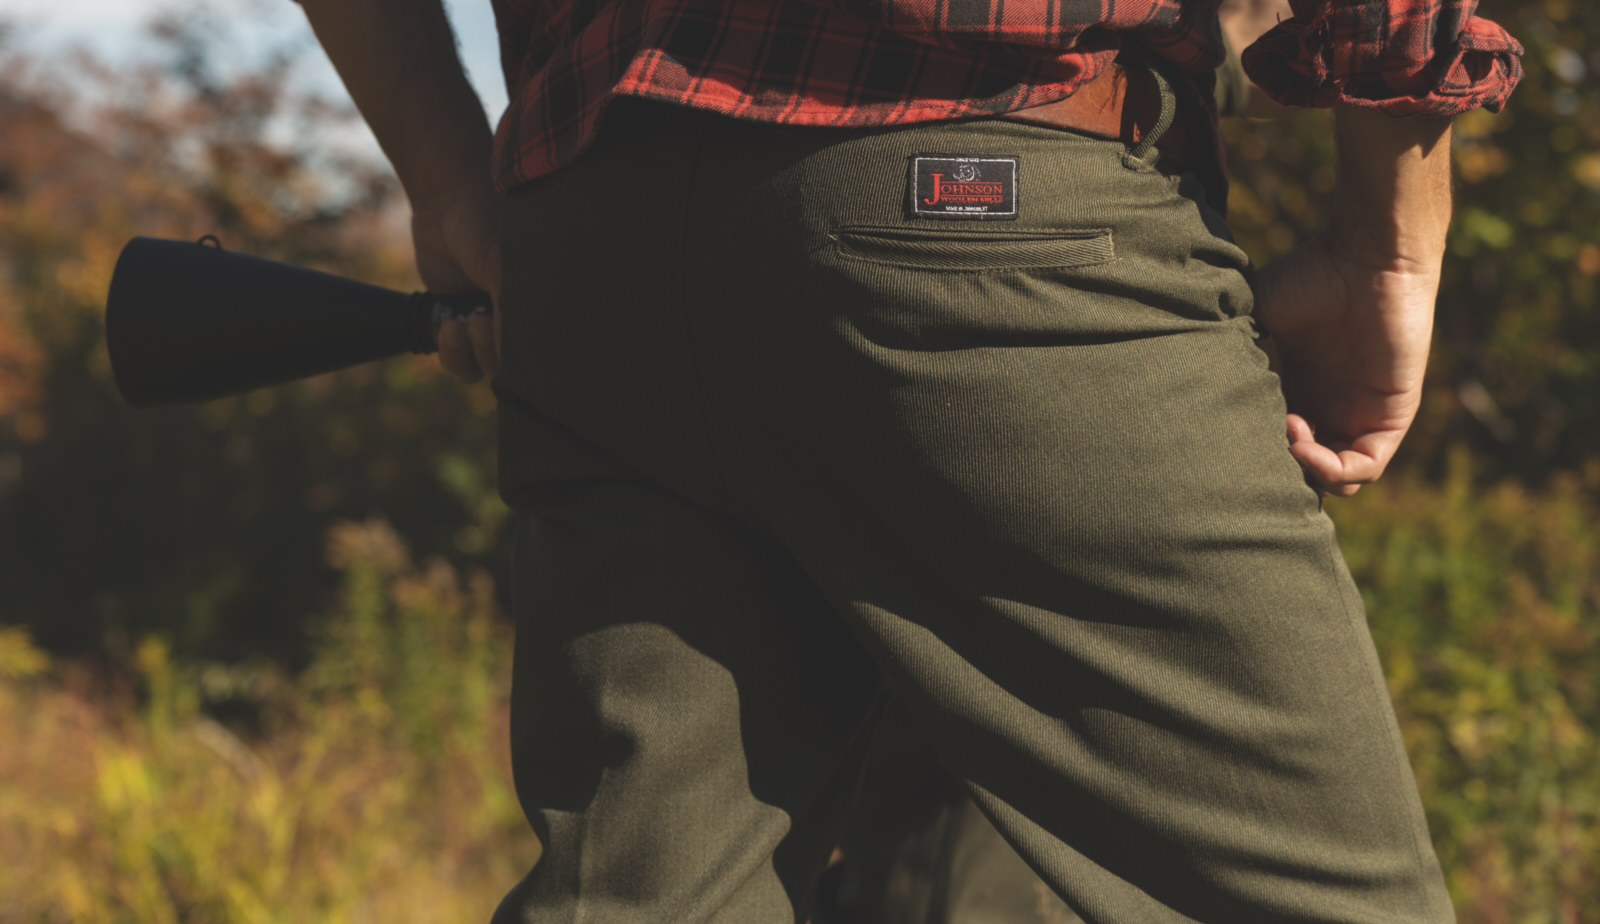 Back pocket of Northwoods X 1842 Wool Pants on model in the woods